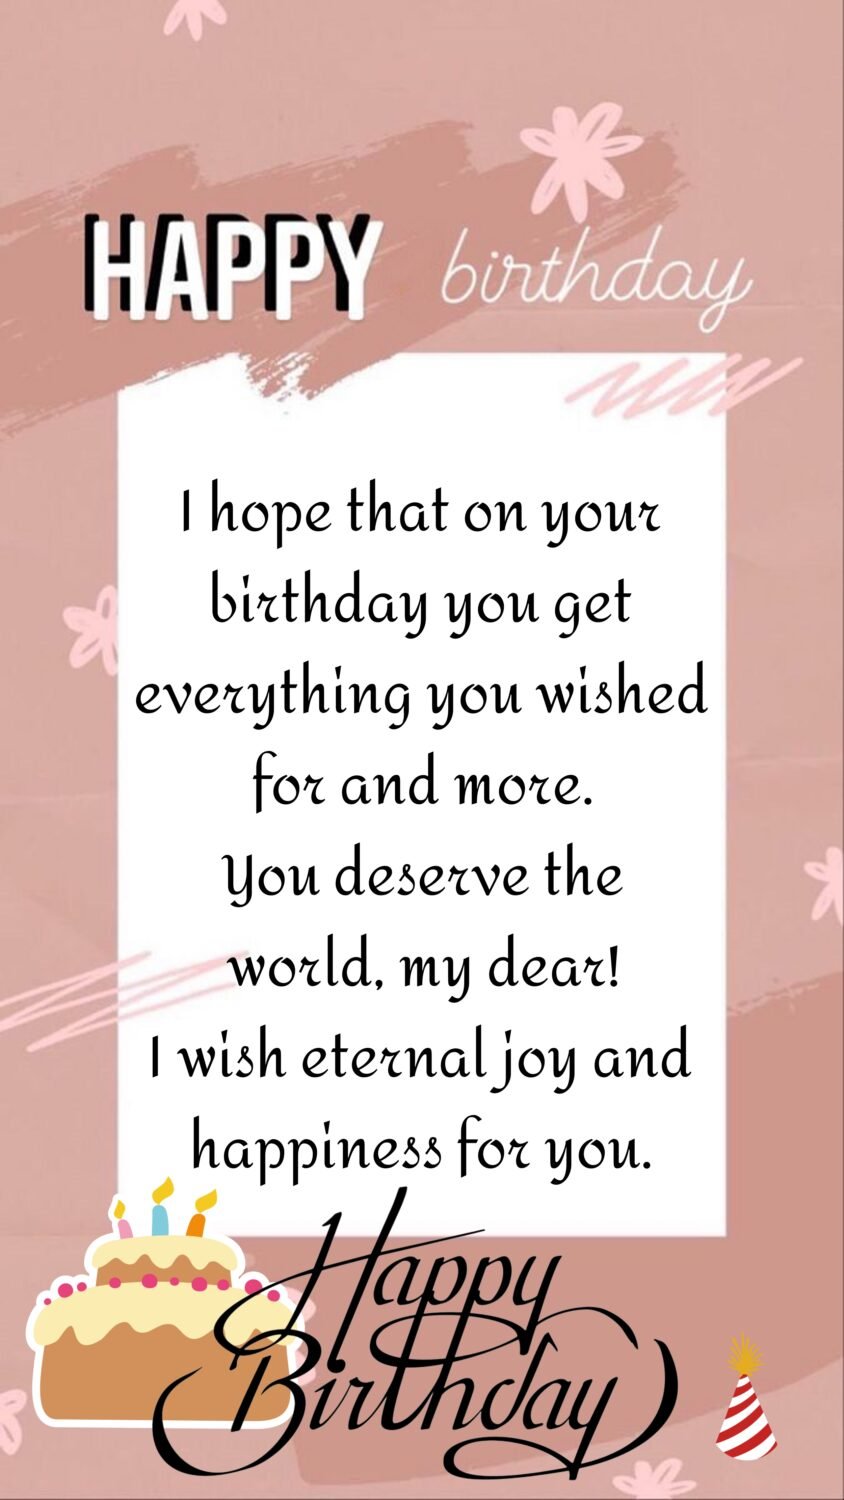 21+ Beautiful Birthday wishes with Images & Quotes